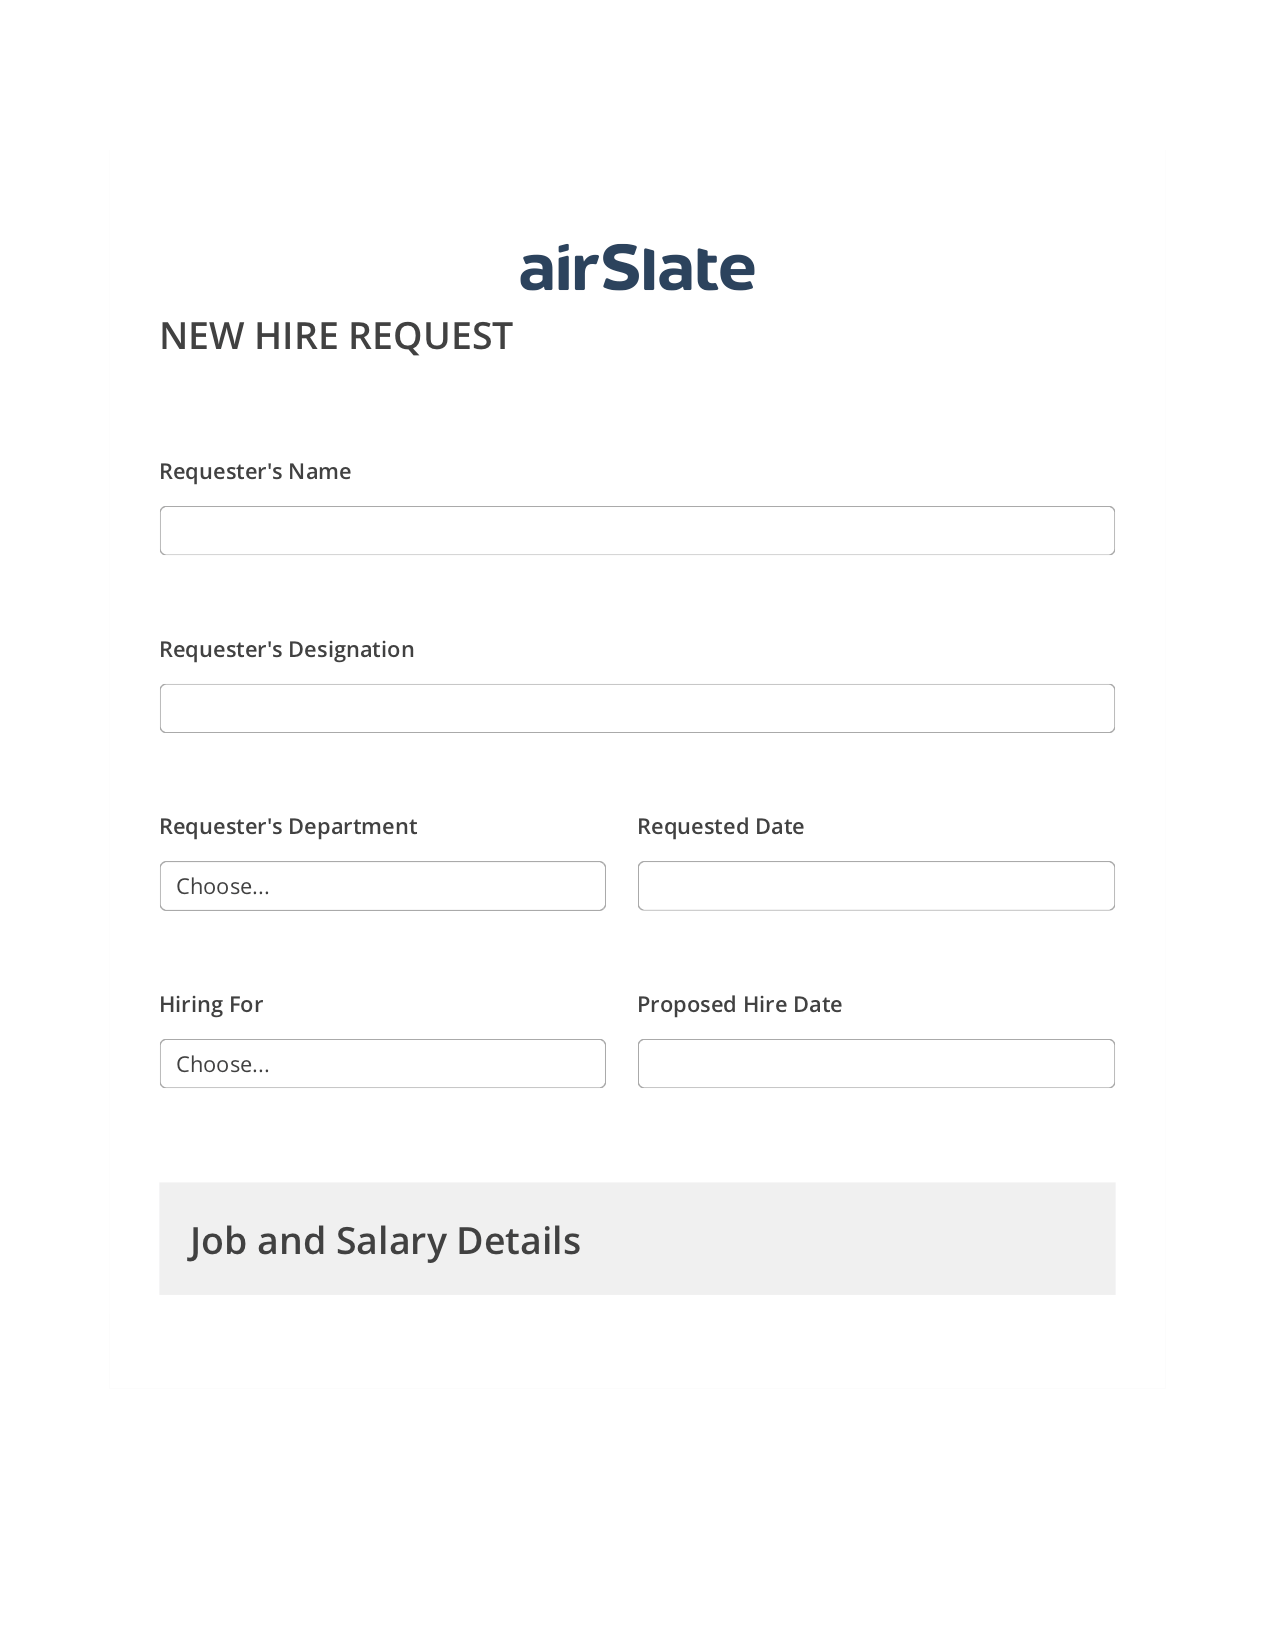 Hiring Request Workflow Pre-fill from MS Dynamics 365 Records, Text Message Notification Bot, Archive to Google Drive Bot